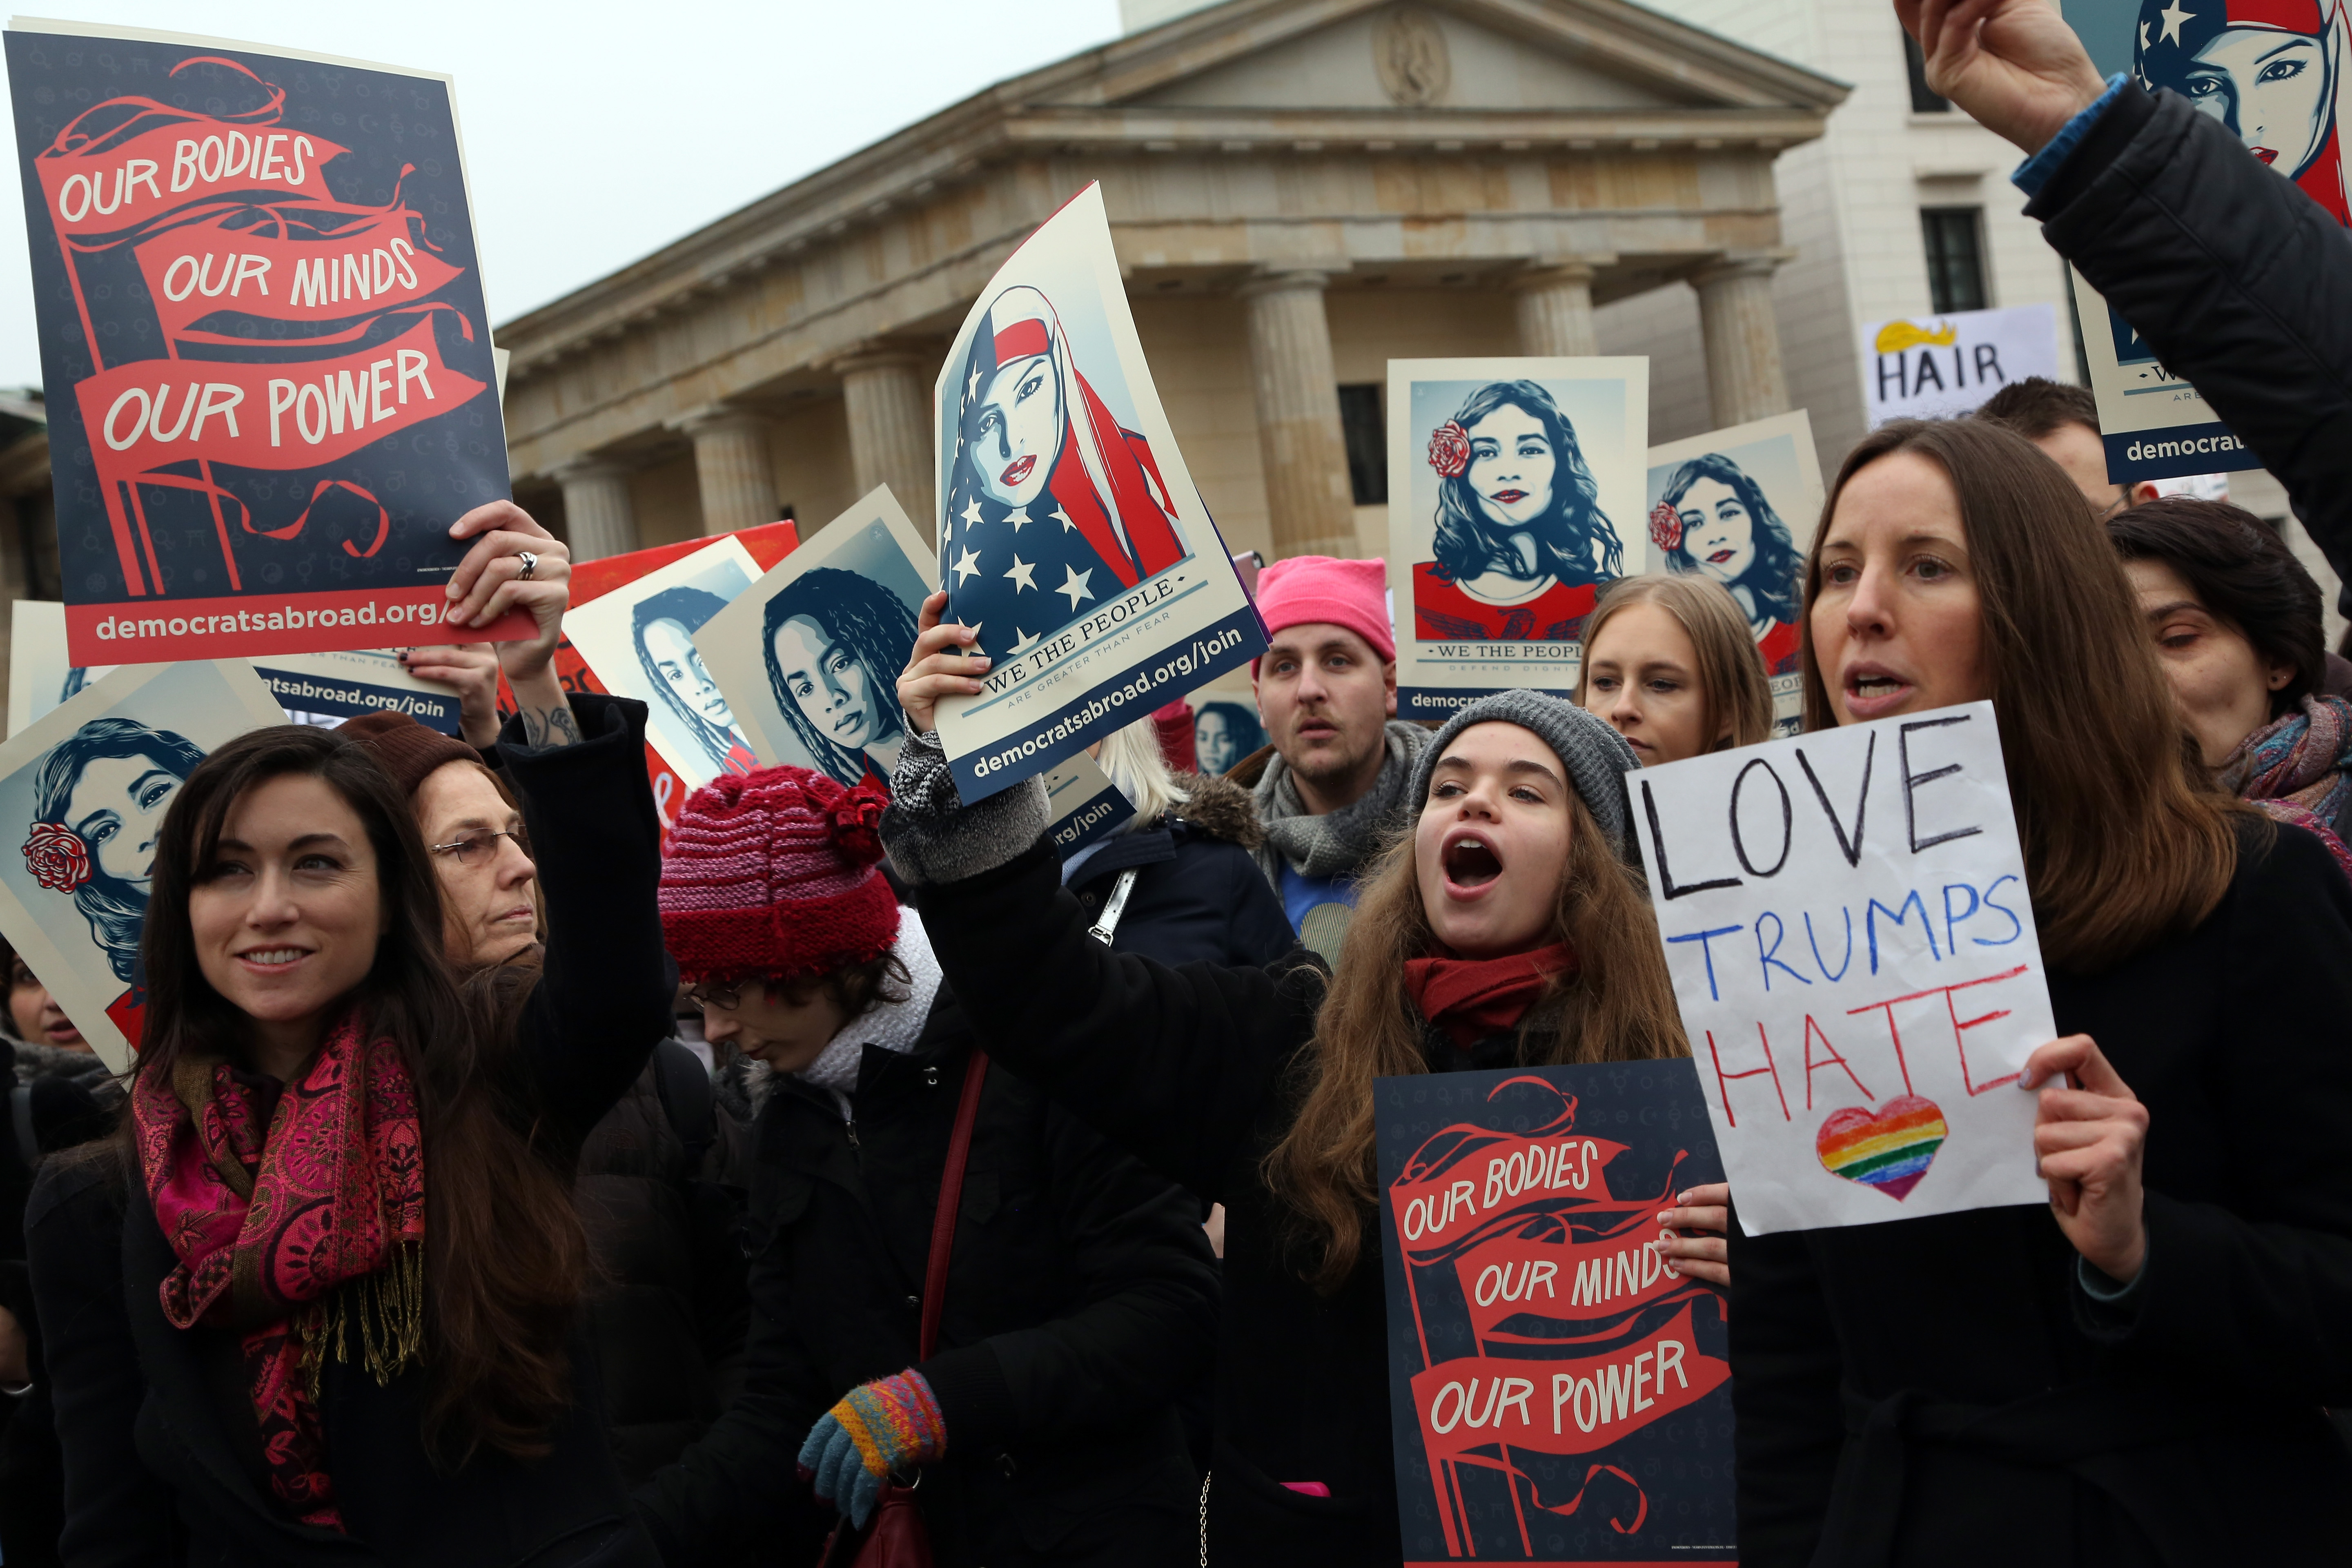 Demonstration in front of the United States Embassy and Brandenburg Gate one day after the inauguration of U.S. President Donald Trump on Jan. 21, 2017 in Berlin, Germany.